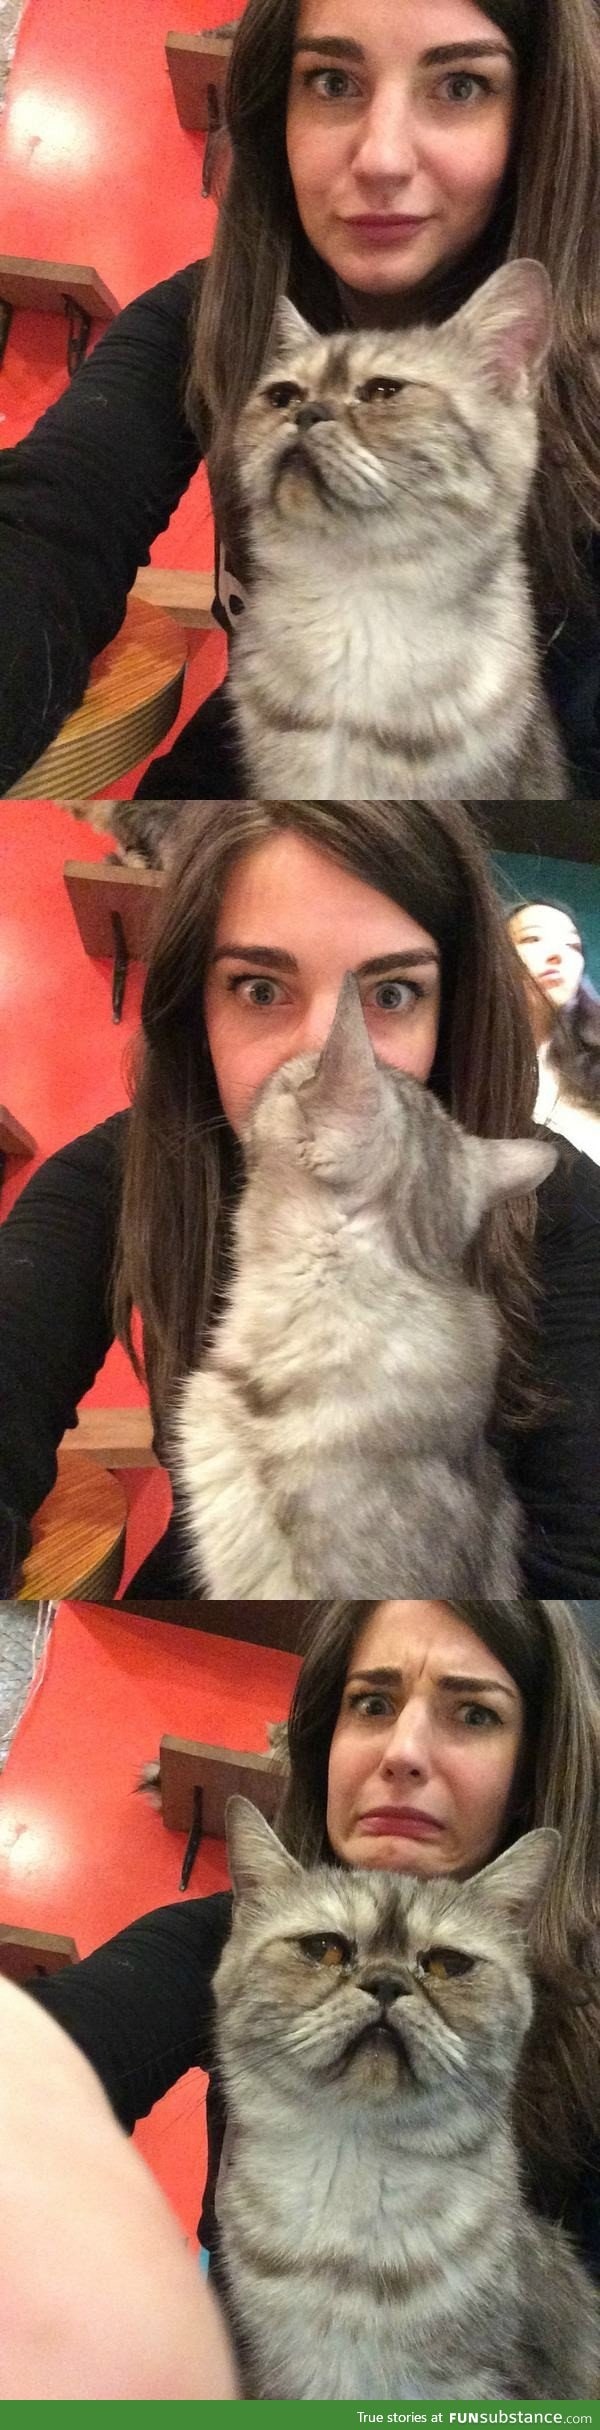 She was taking selfies with this cat and he surprise-kissed her